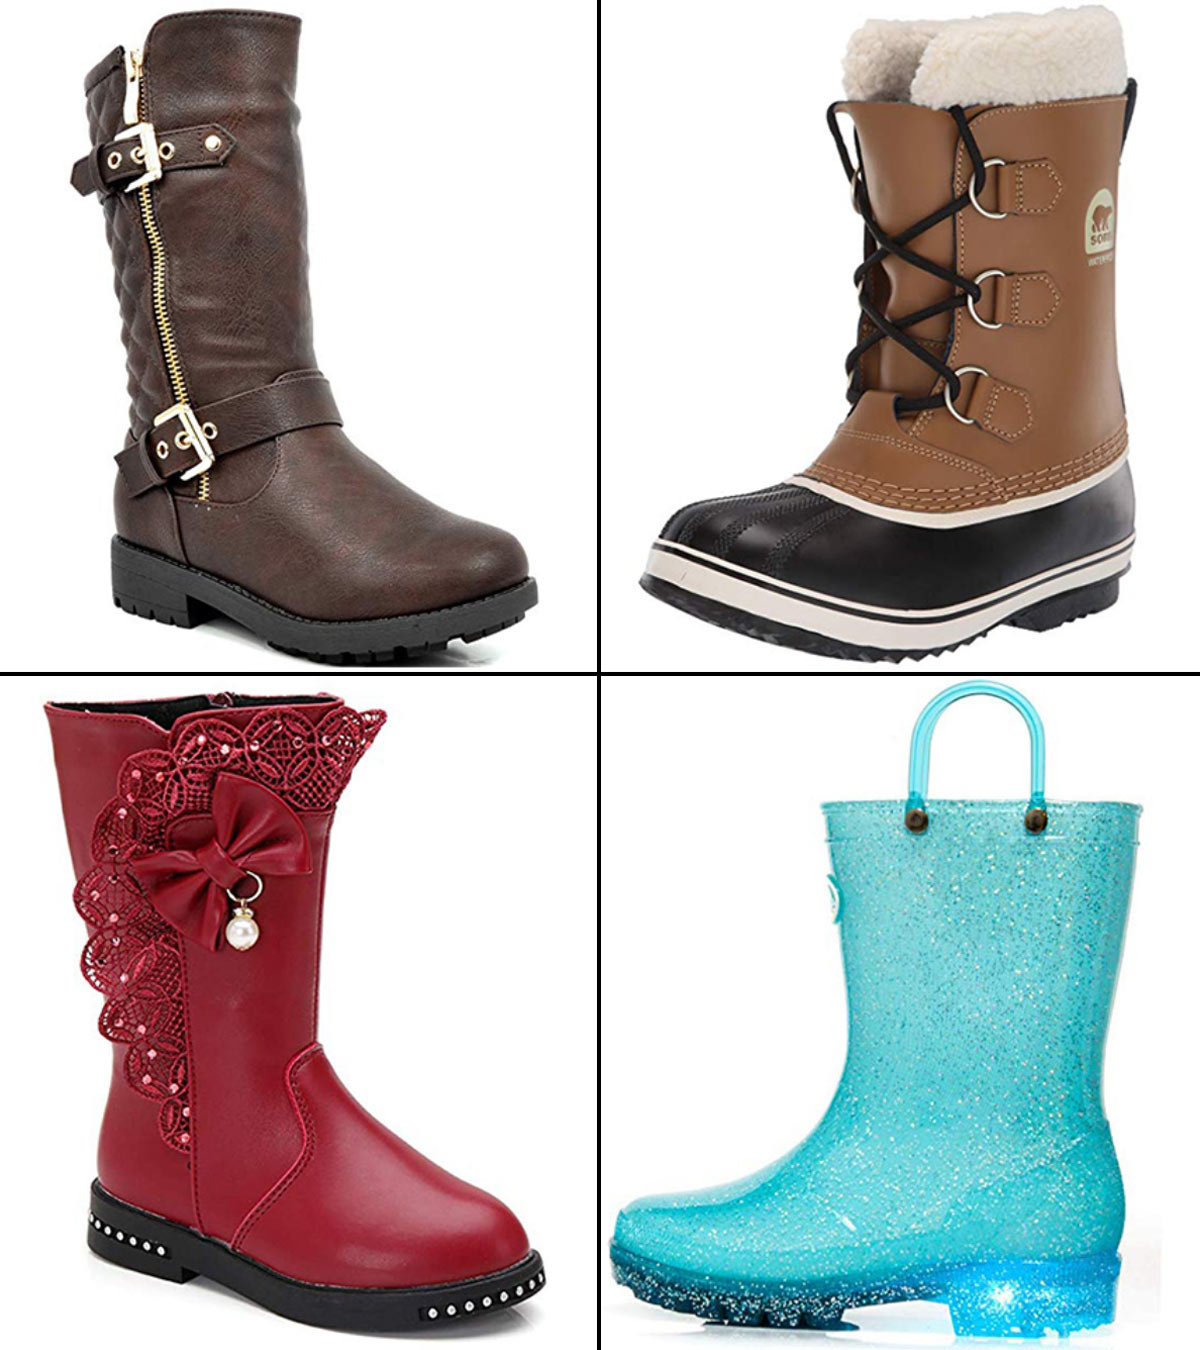 15 Best Boots For Girls To Buy In 2020